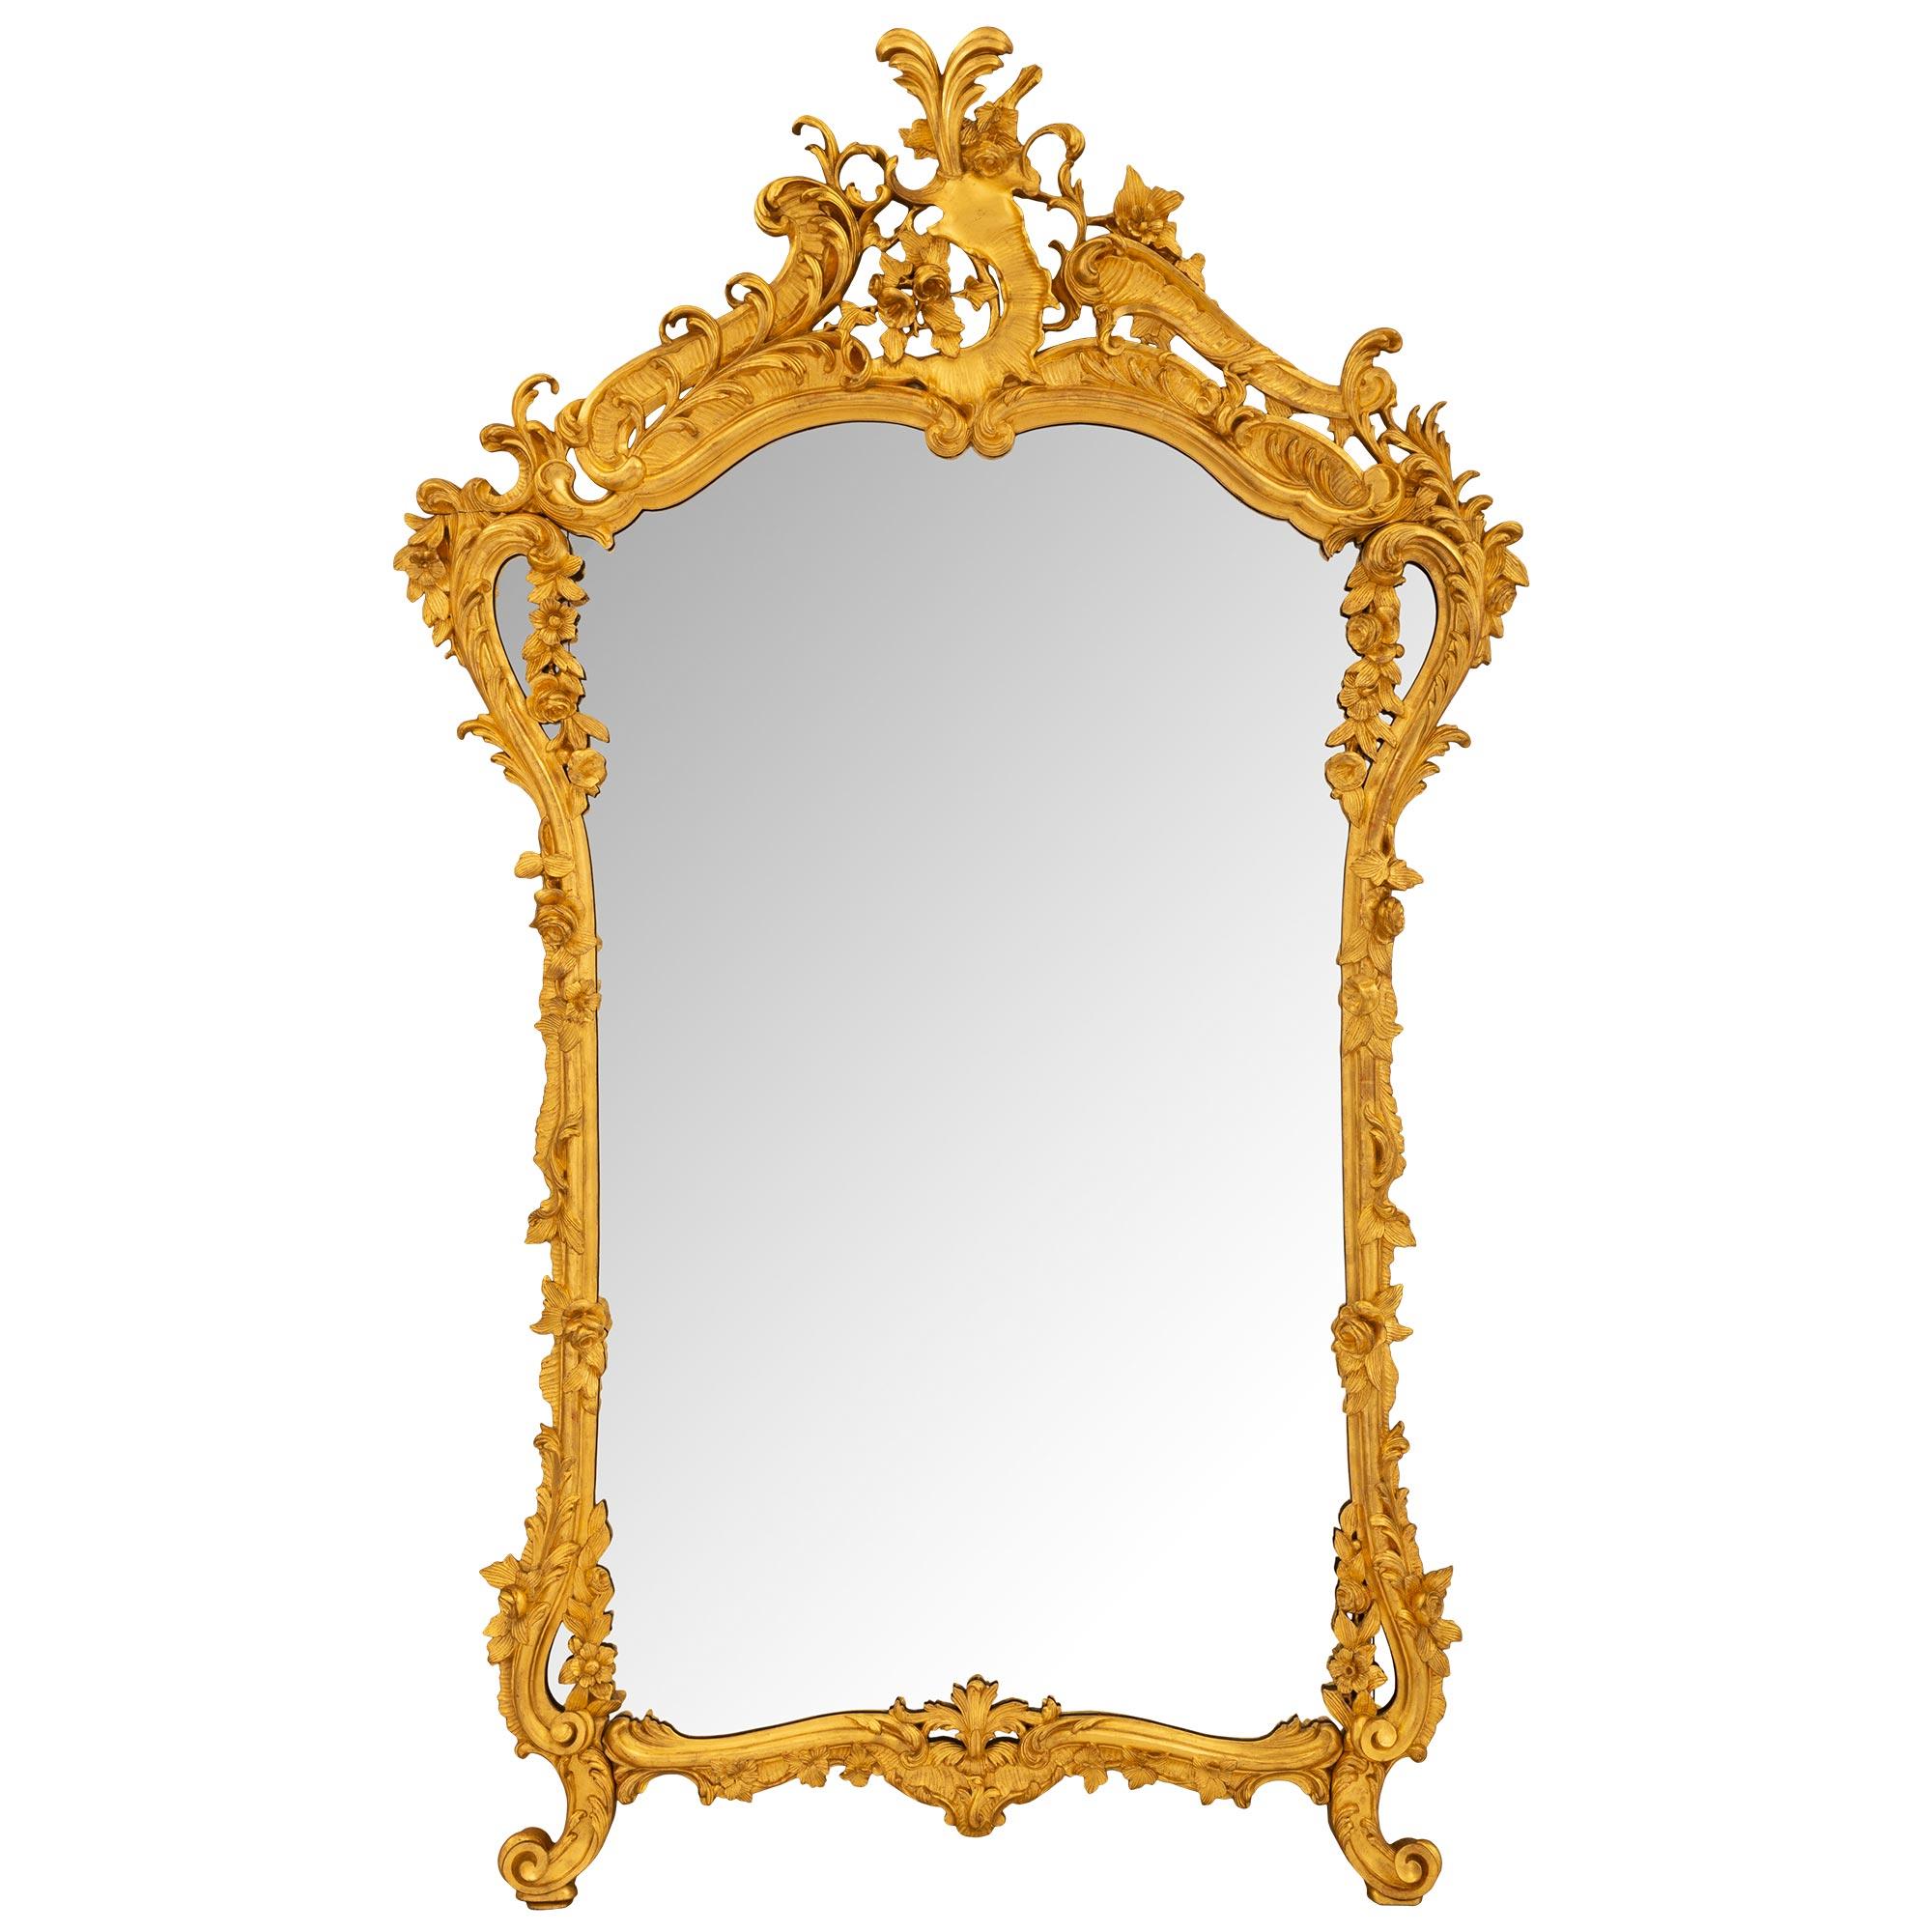 A beautiful and impressive Italian 19th century Louis XV st. giltwood mirror. The mirror retains its original mirror plate set within a lovely scalloped shaped mottled band. At the base are lovely elegantly scrolled feet flanking a beautiful foliate